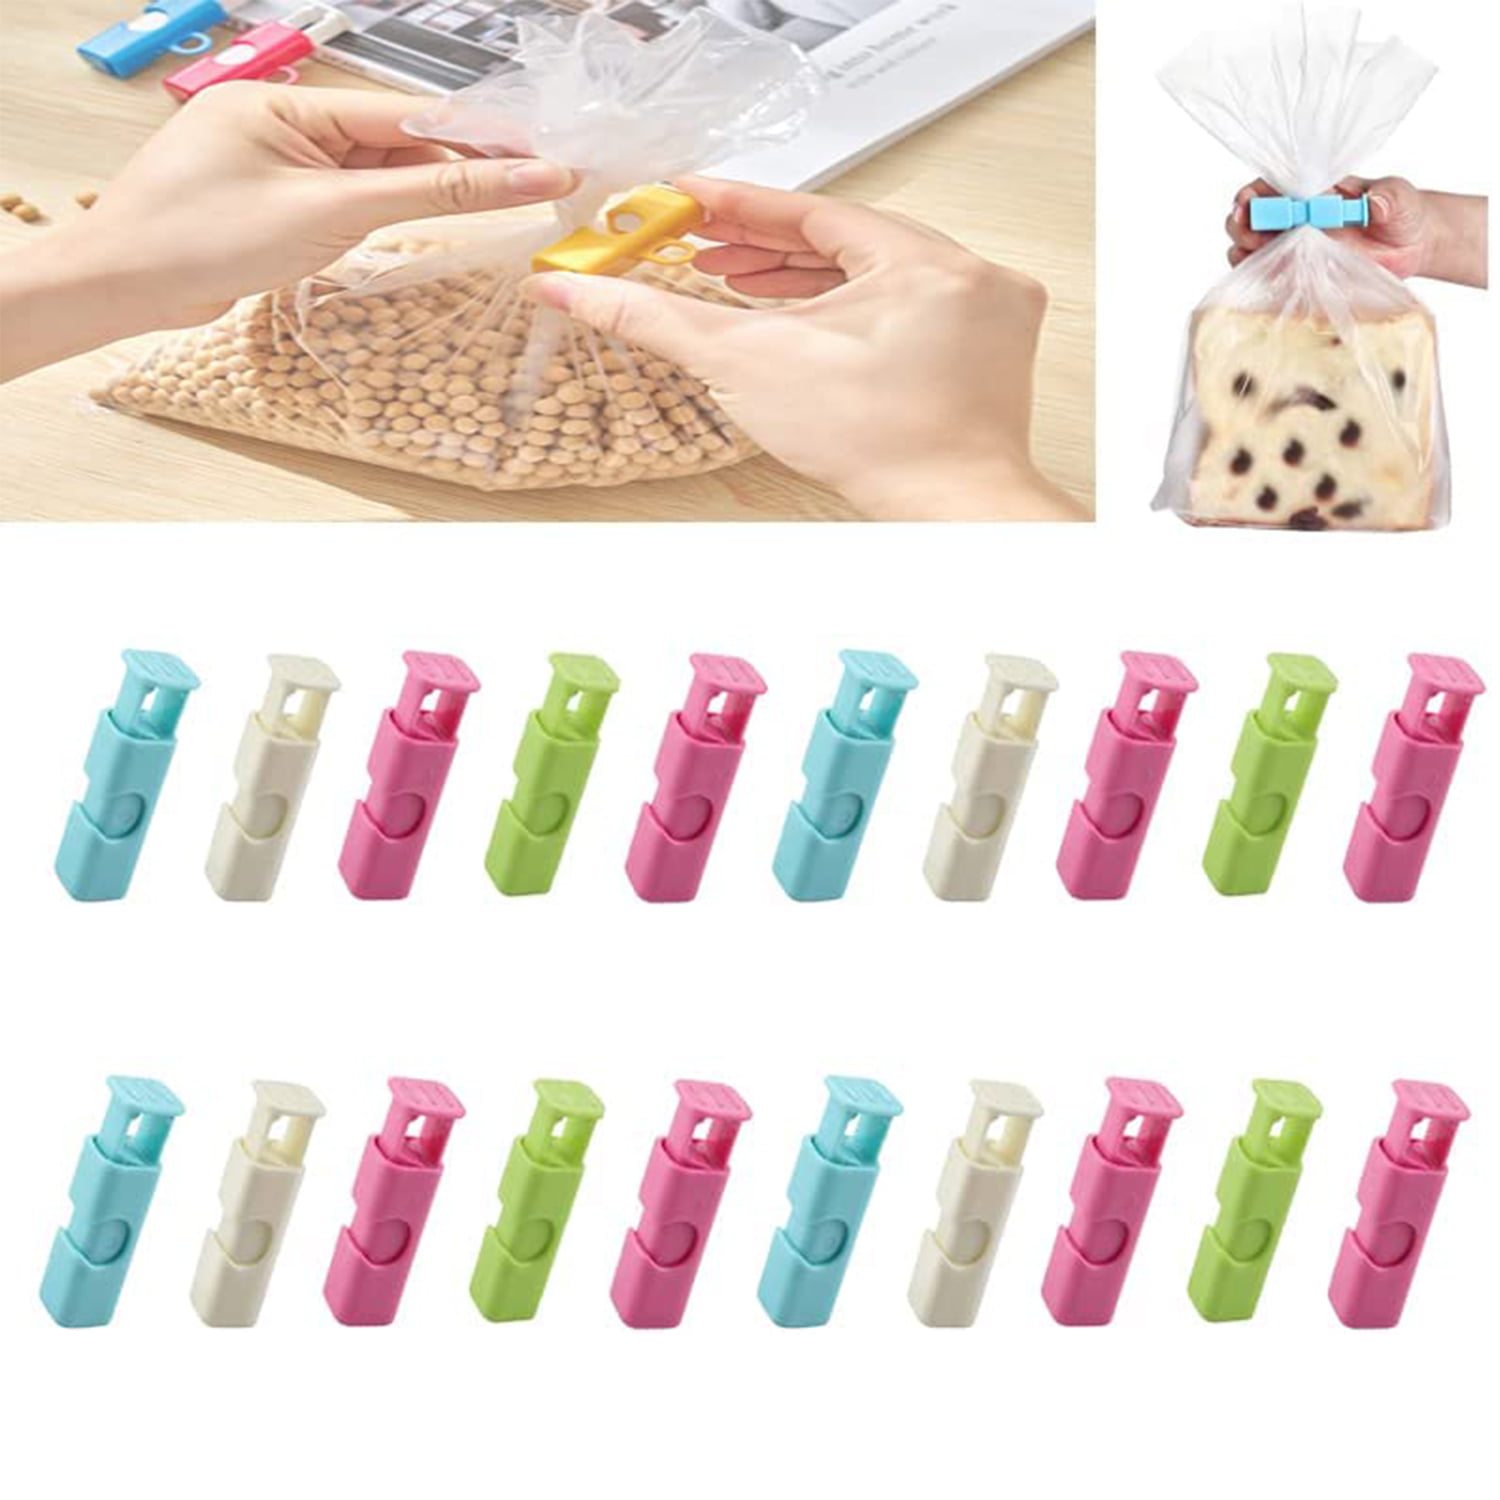  Cozihom Squeeze Bread Bag Clips, Bag Cinches, Bagel Bag Clips,  Slip Grip Easy Squeeze & Lock, Assorted Color, 6 Pack : Home & Kitchen